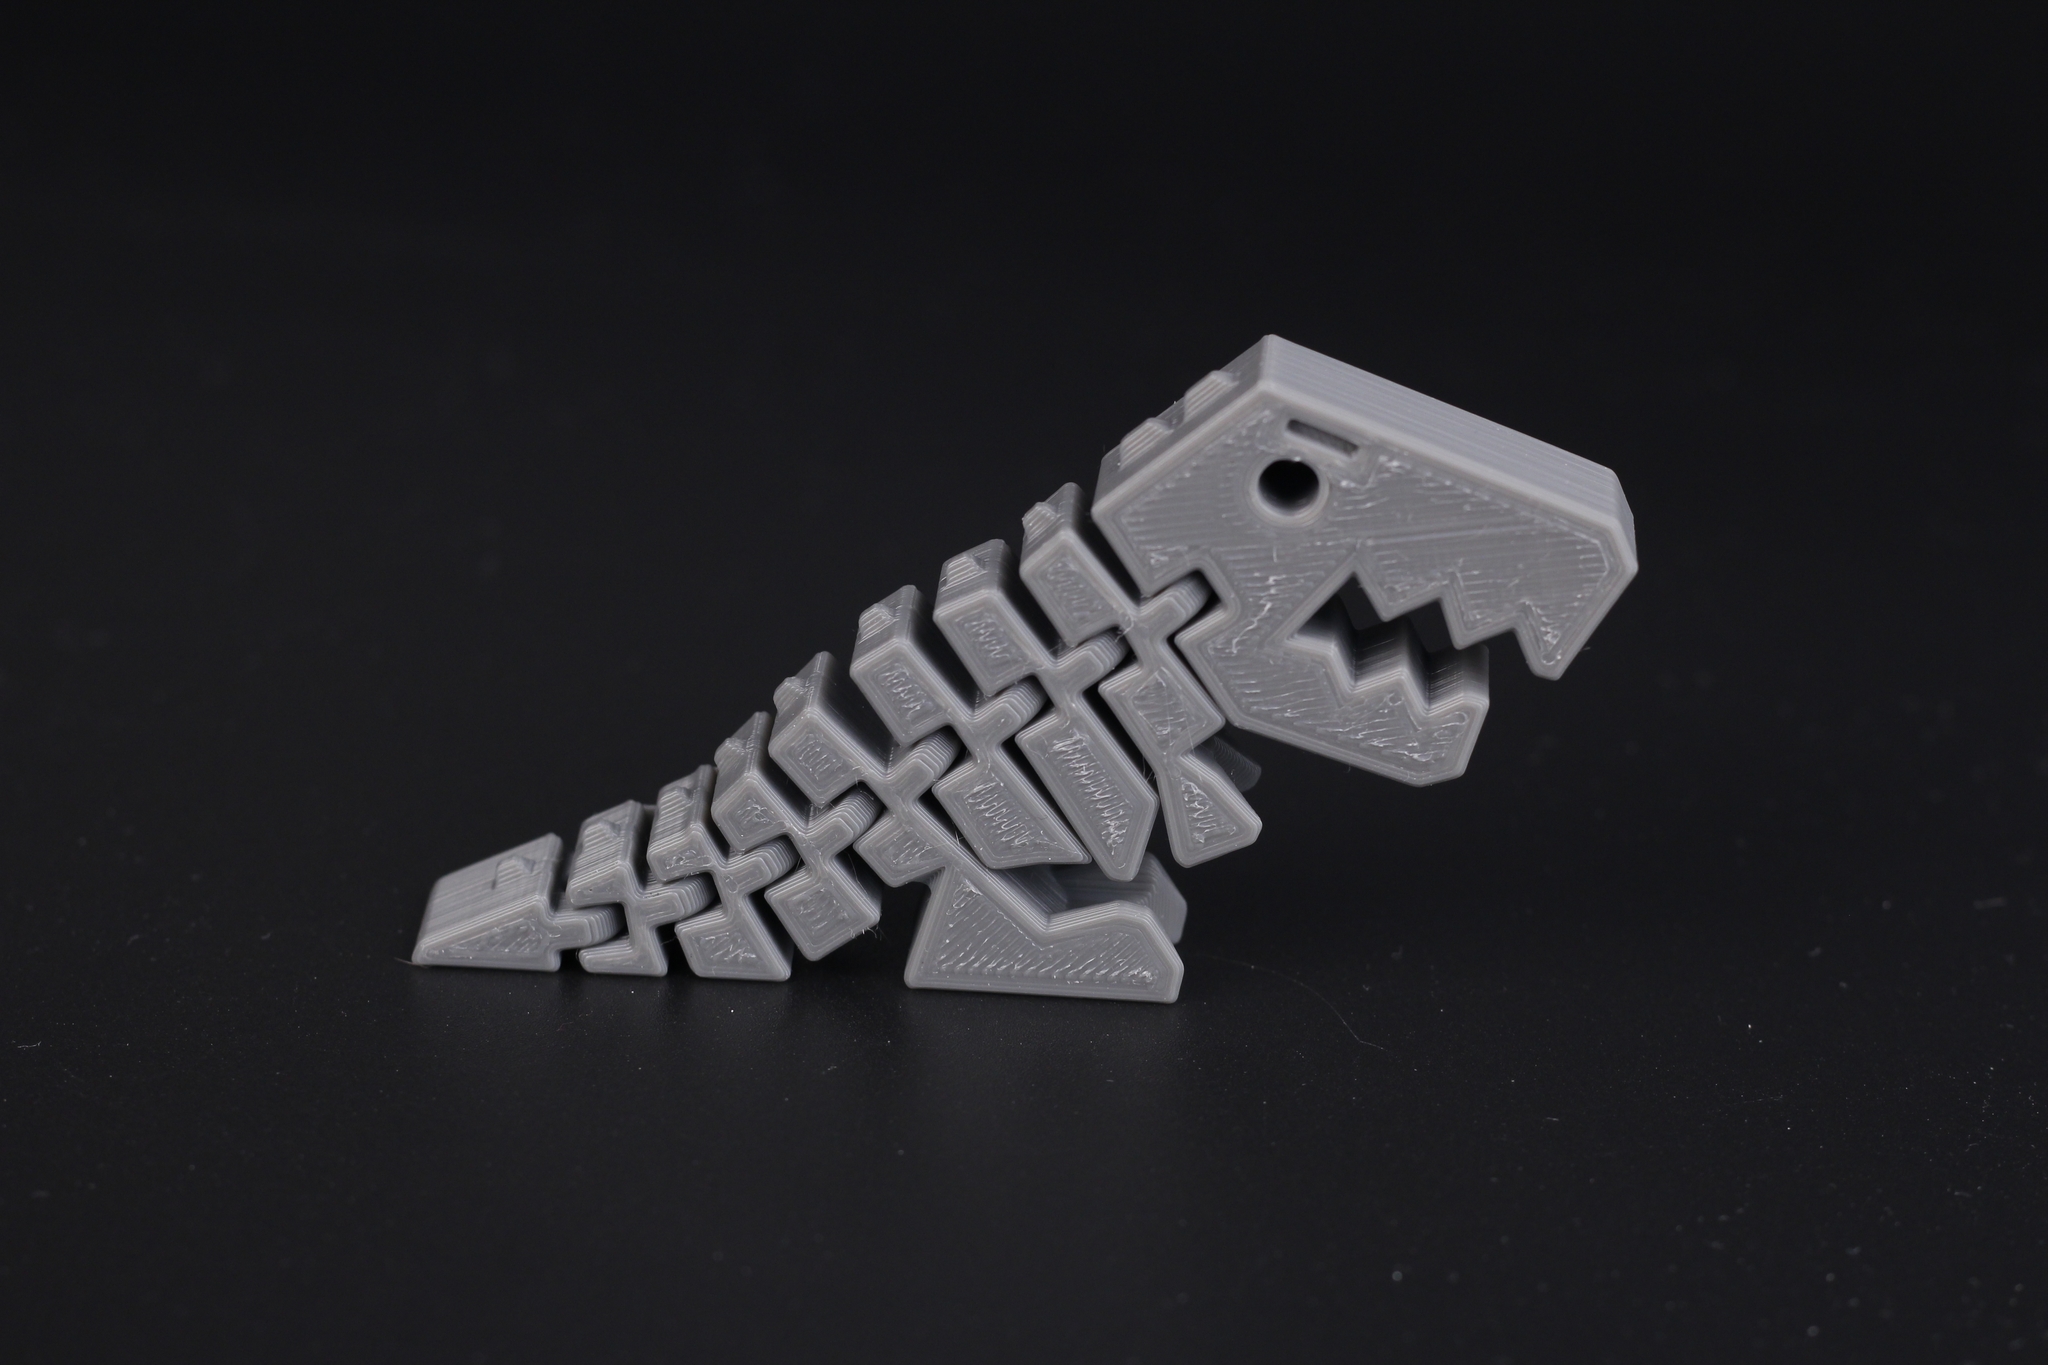 Flexi Dino printed on Sermoon V1 Pro3 | Creality Sermoon V1 Pro Review: Can it deliver on its promises?